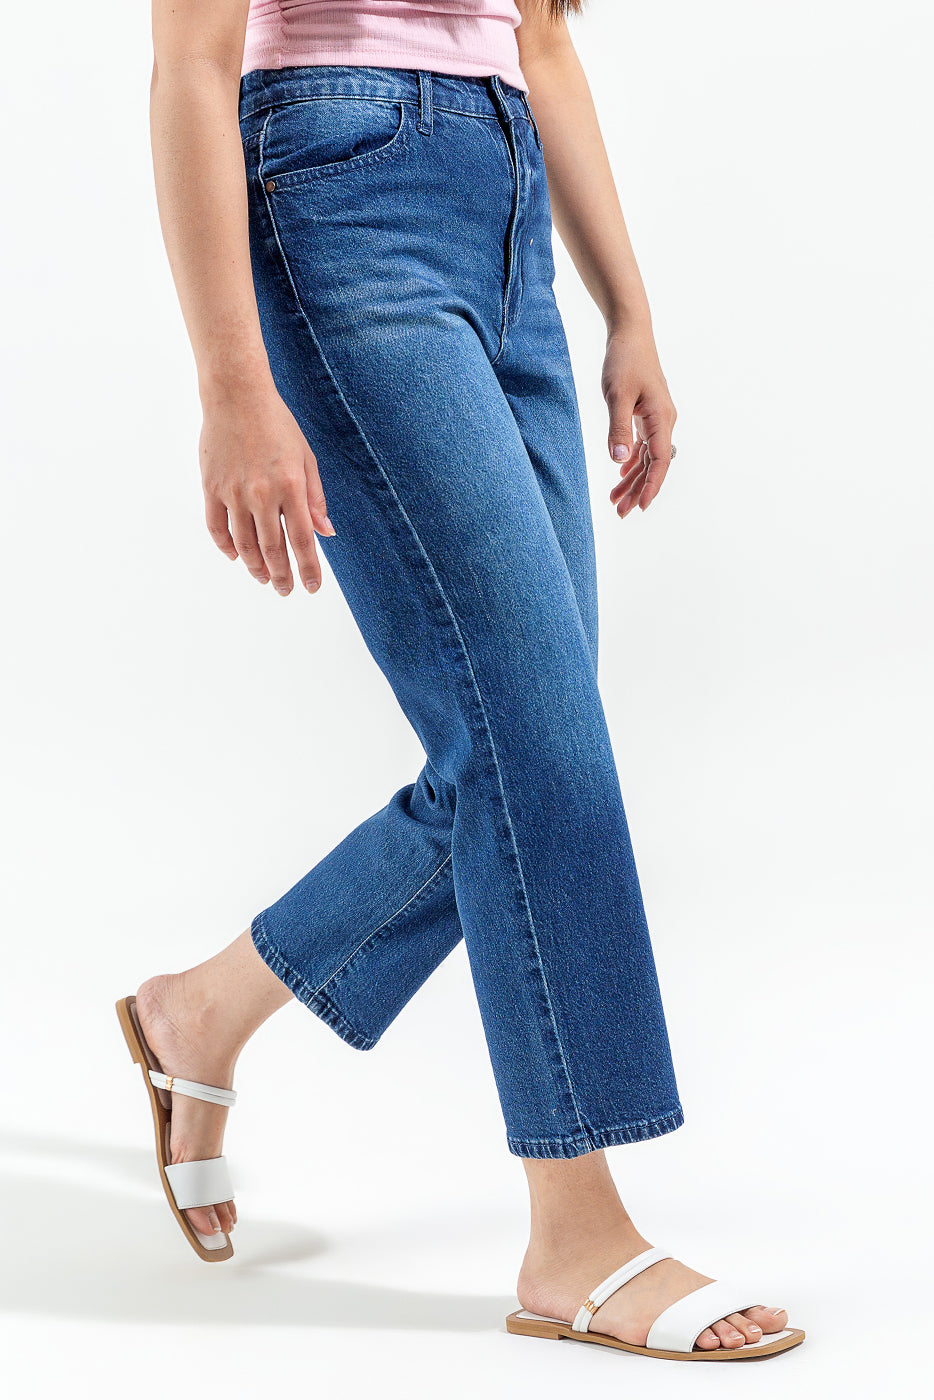 HIGH-RISE STRAIGHT JEANS - BEECHTREE